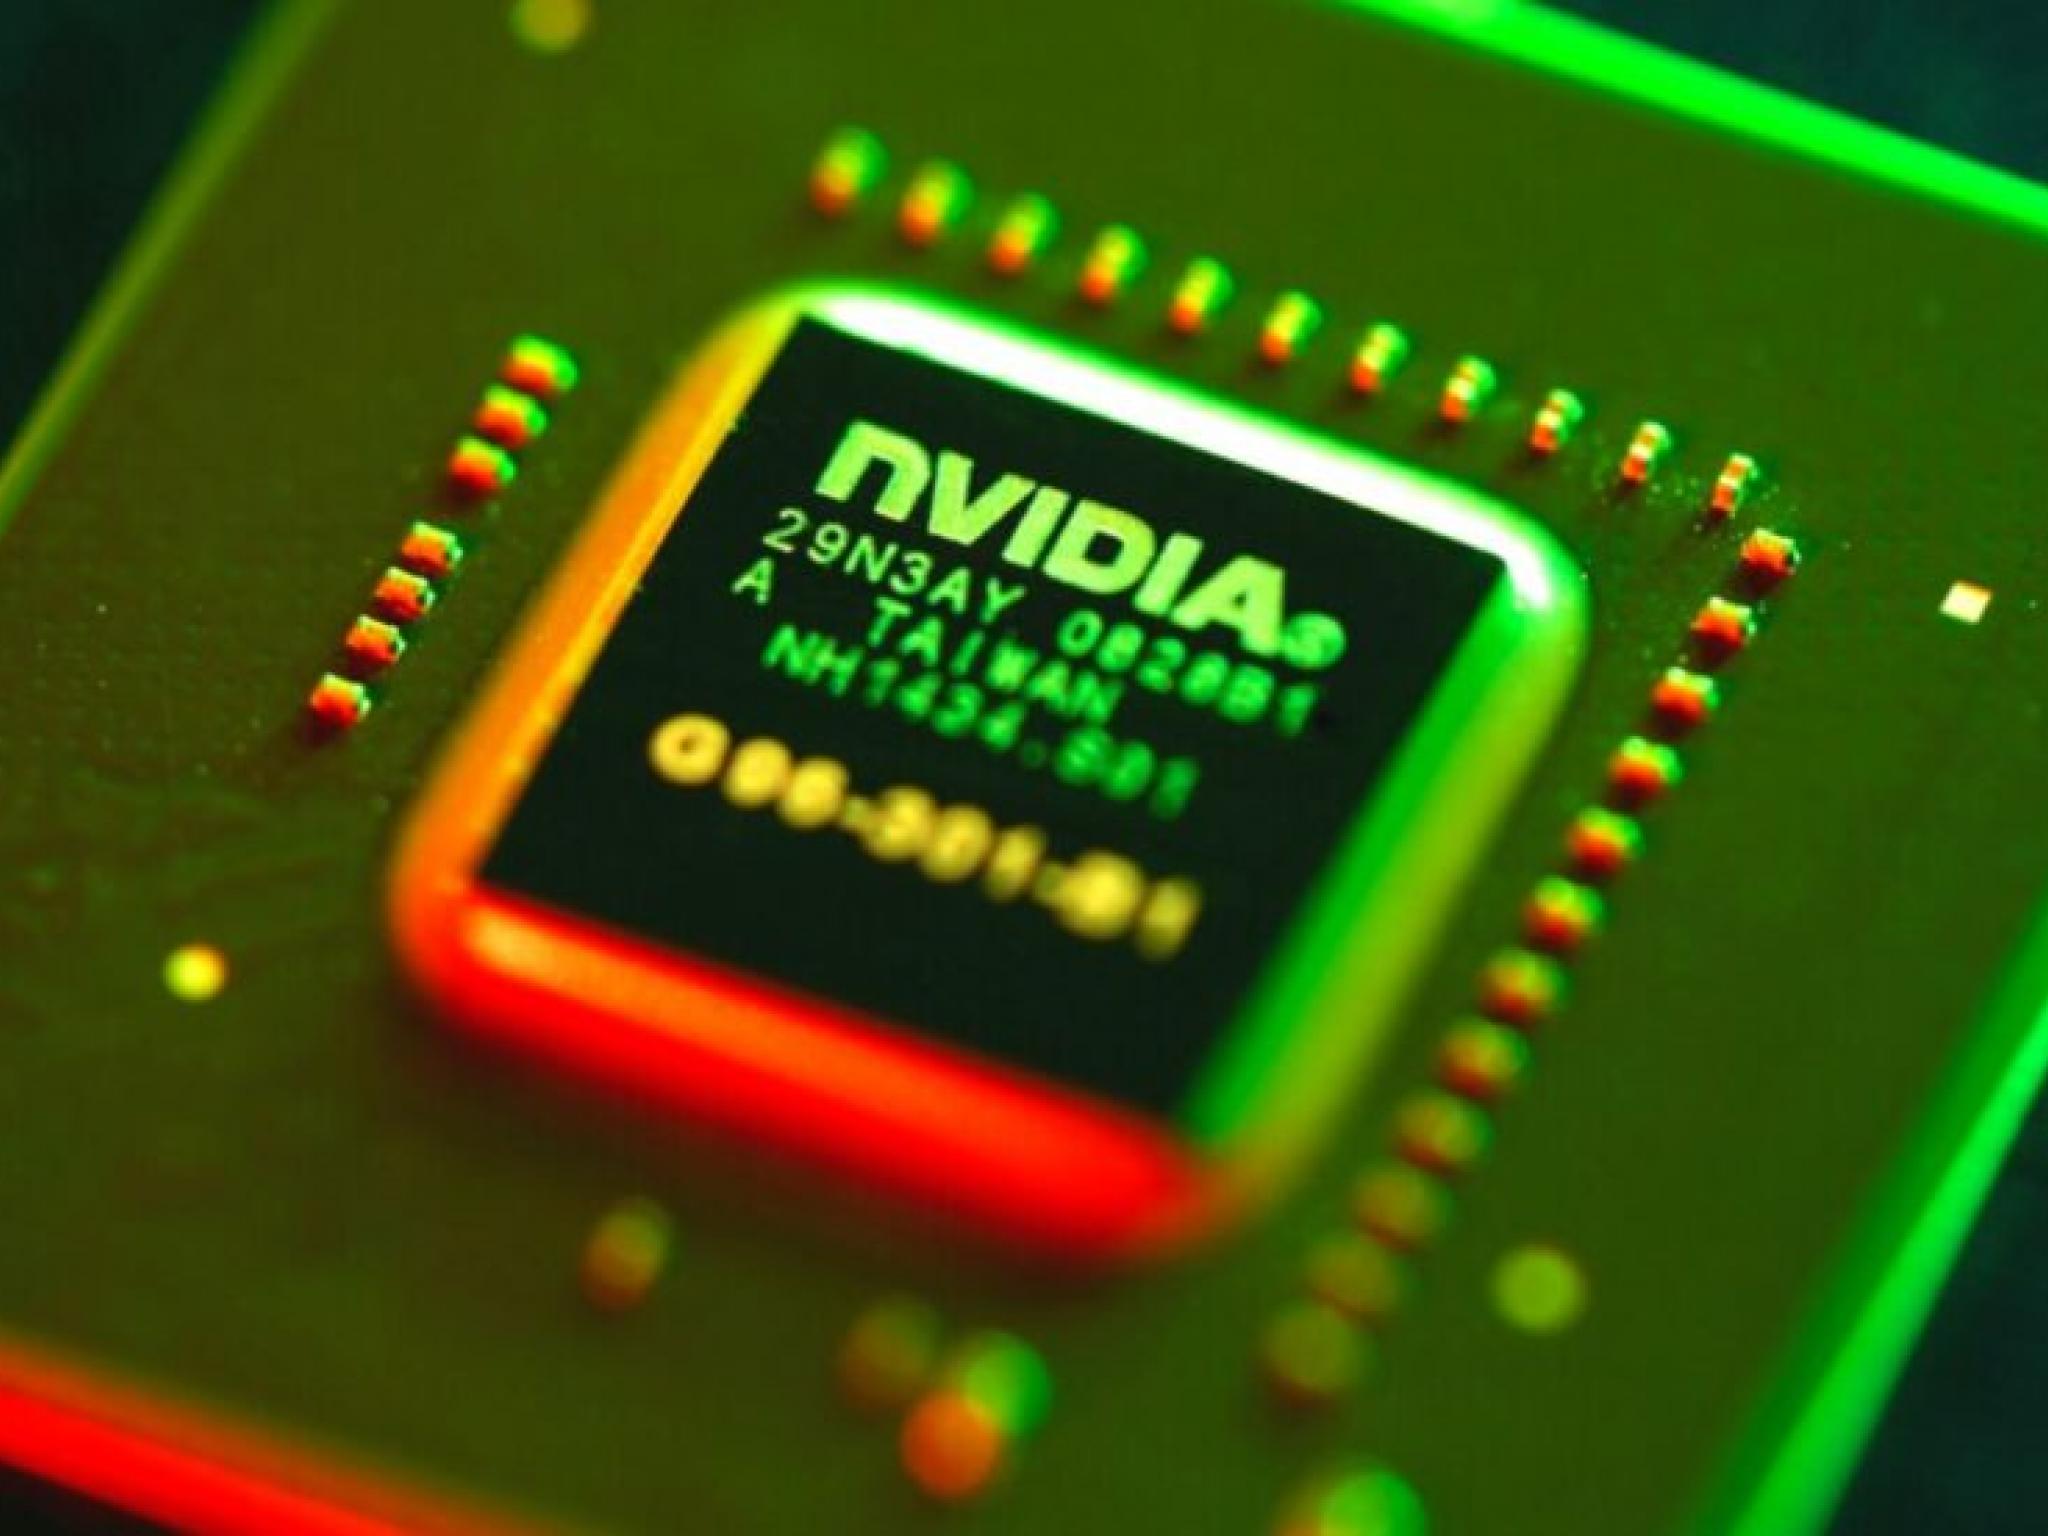  this-analyst-with-91-accuracy-rate-sees-over-57-upside-in-nvidia---here-are-5-stock-picks-for-last-week-from-wall-streets-most-accurate-analysts 